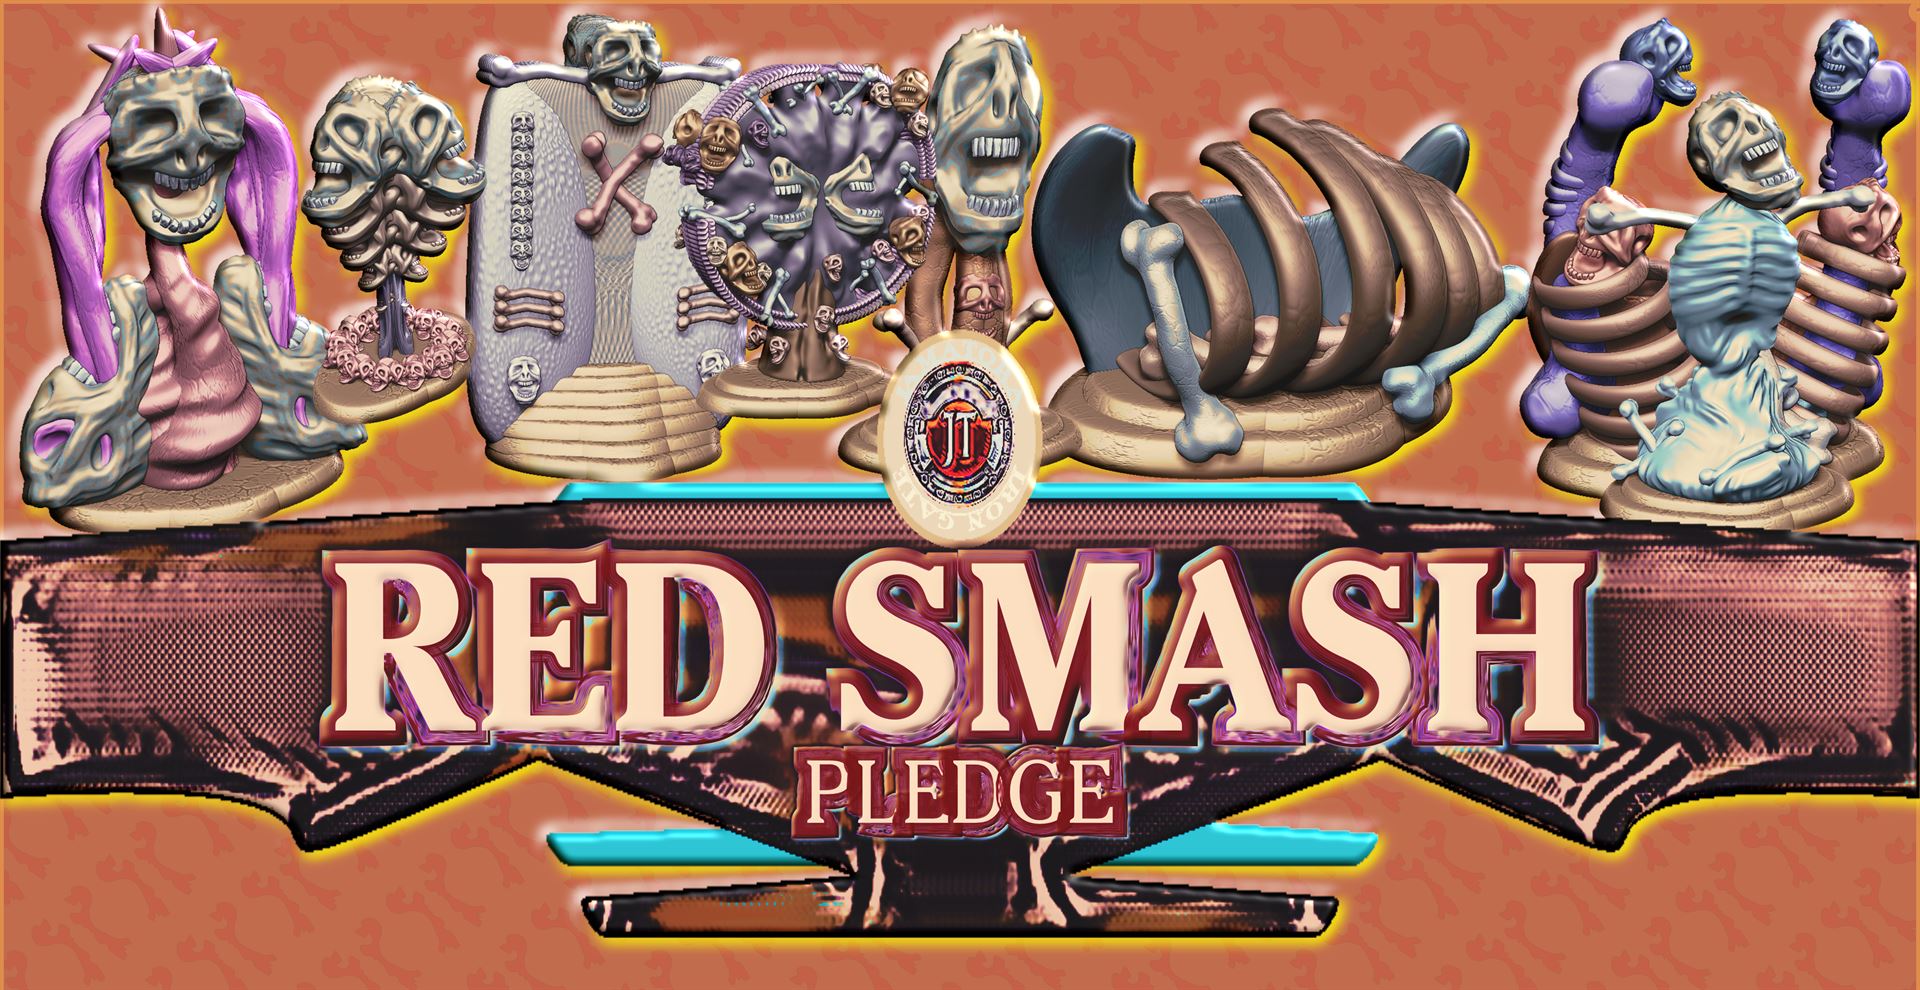 Iron Gate: Lost Worlds – Meet Our Heroes – RED SMASH Set